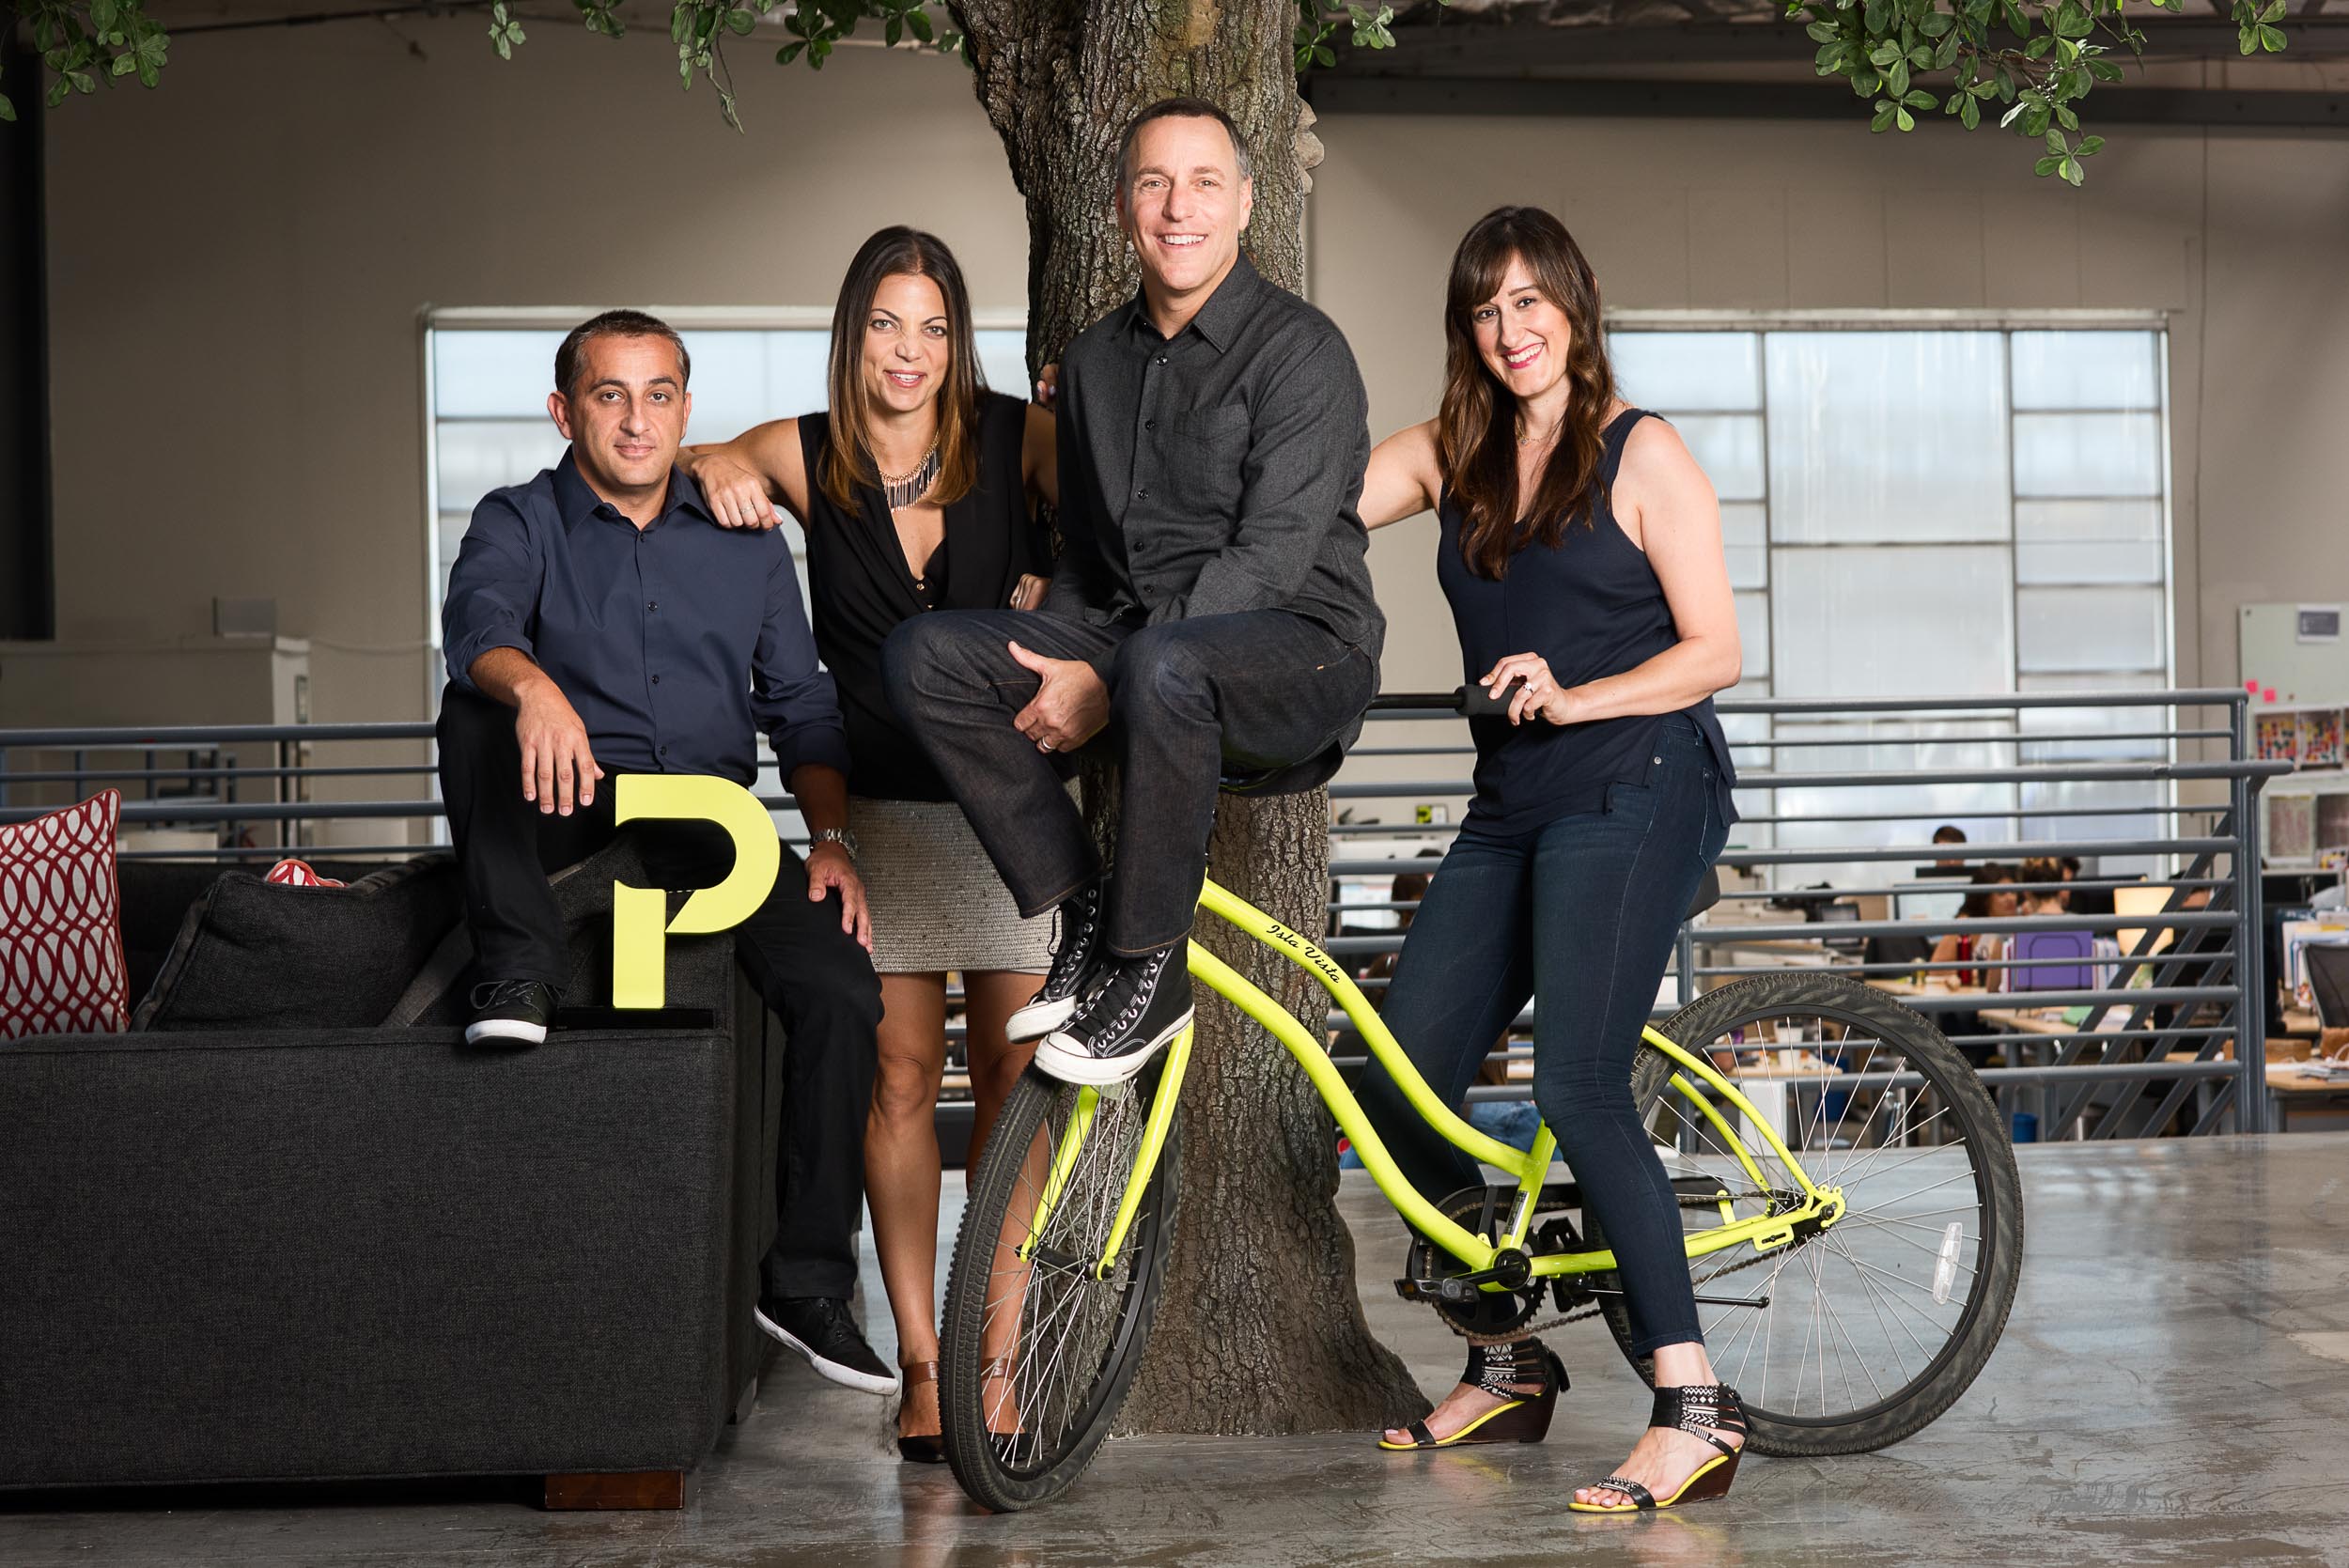 Executive team portrait at the Pitch Advertising Agency in Culver City California.